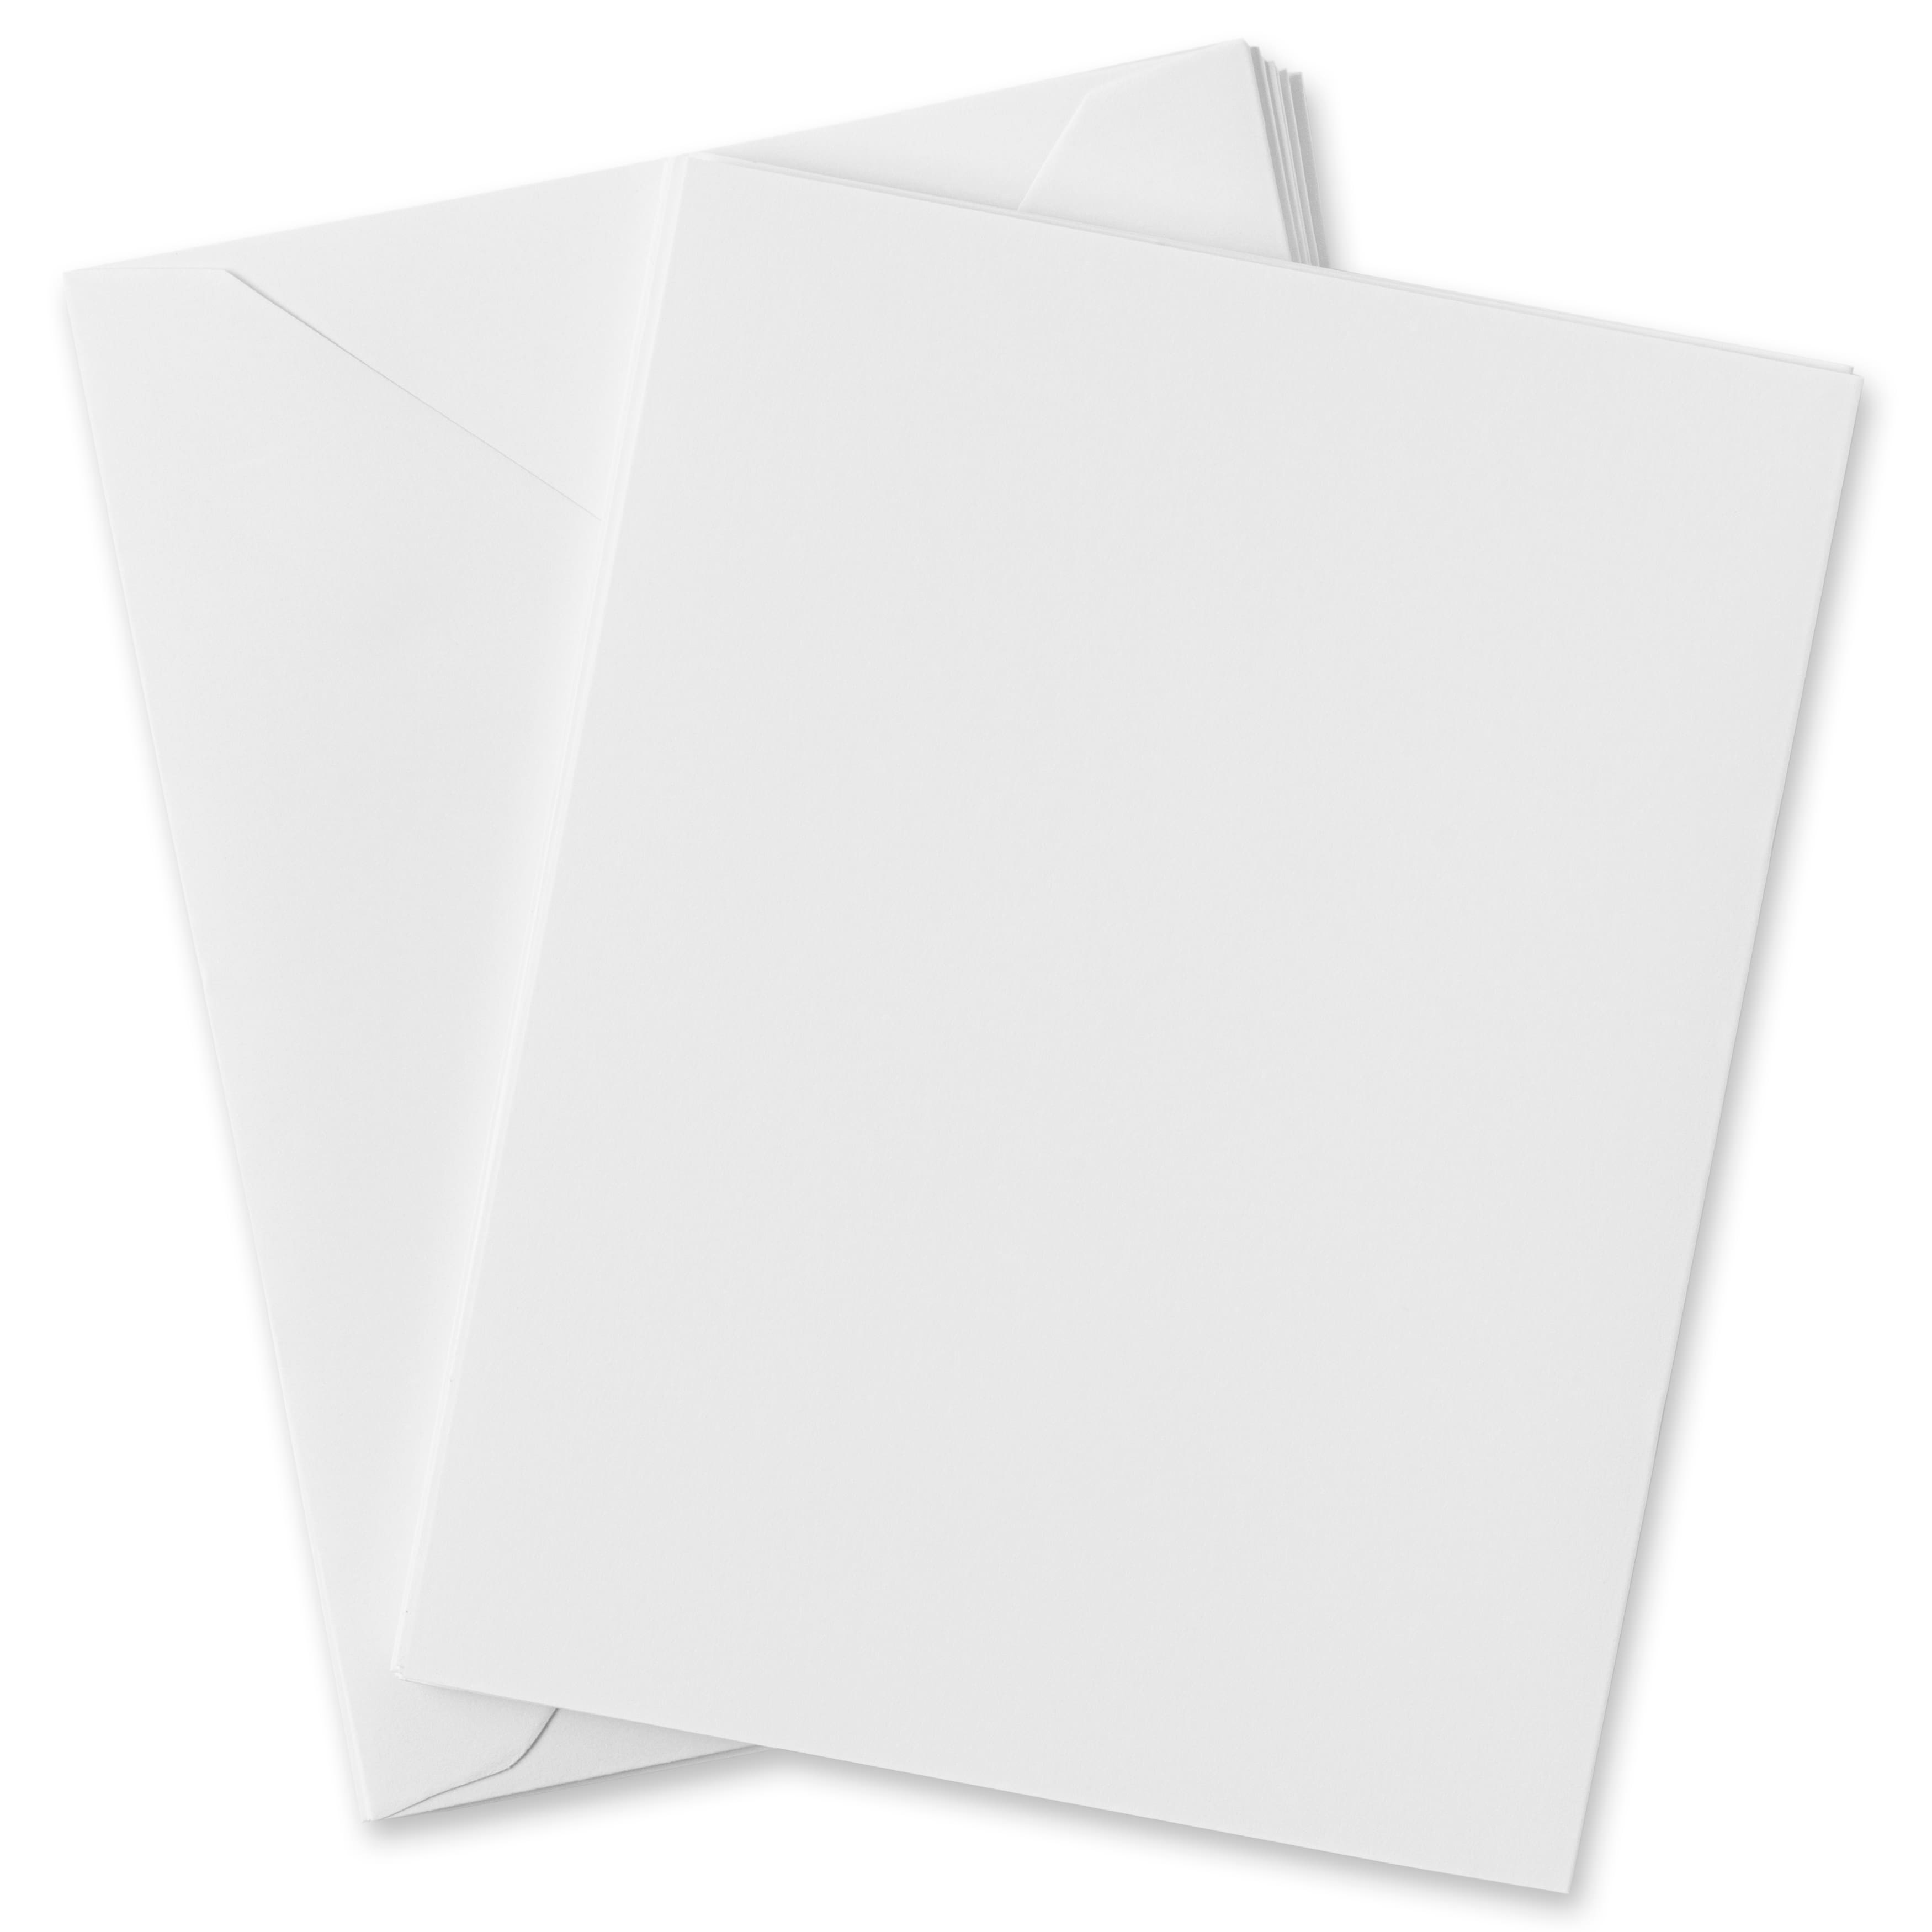 Primary 12 x 12 Linen Texture Cardstock by Recollections™, 60 Sheets